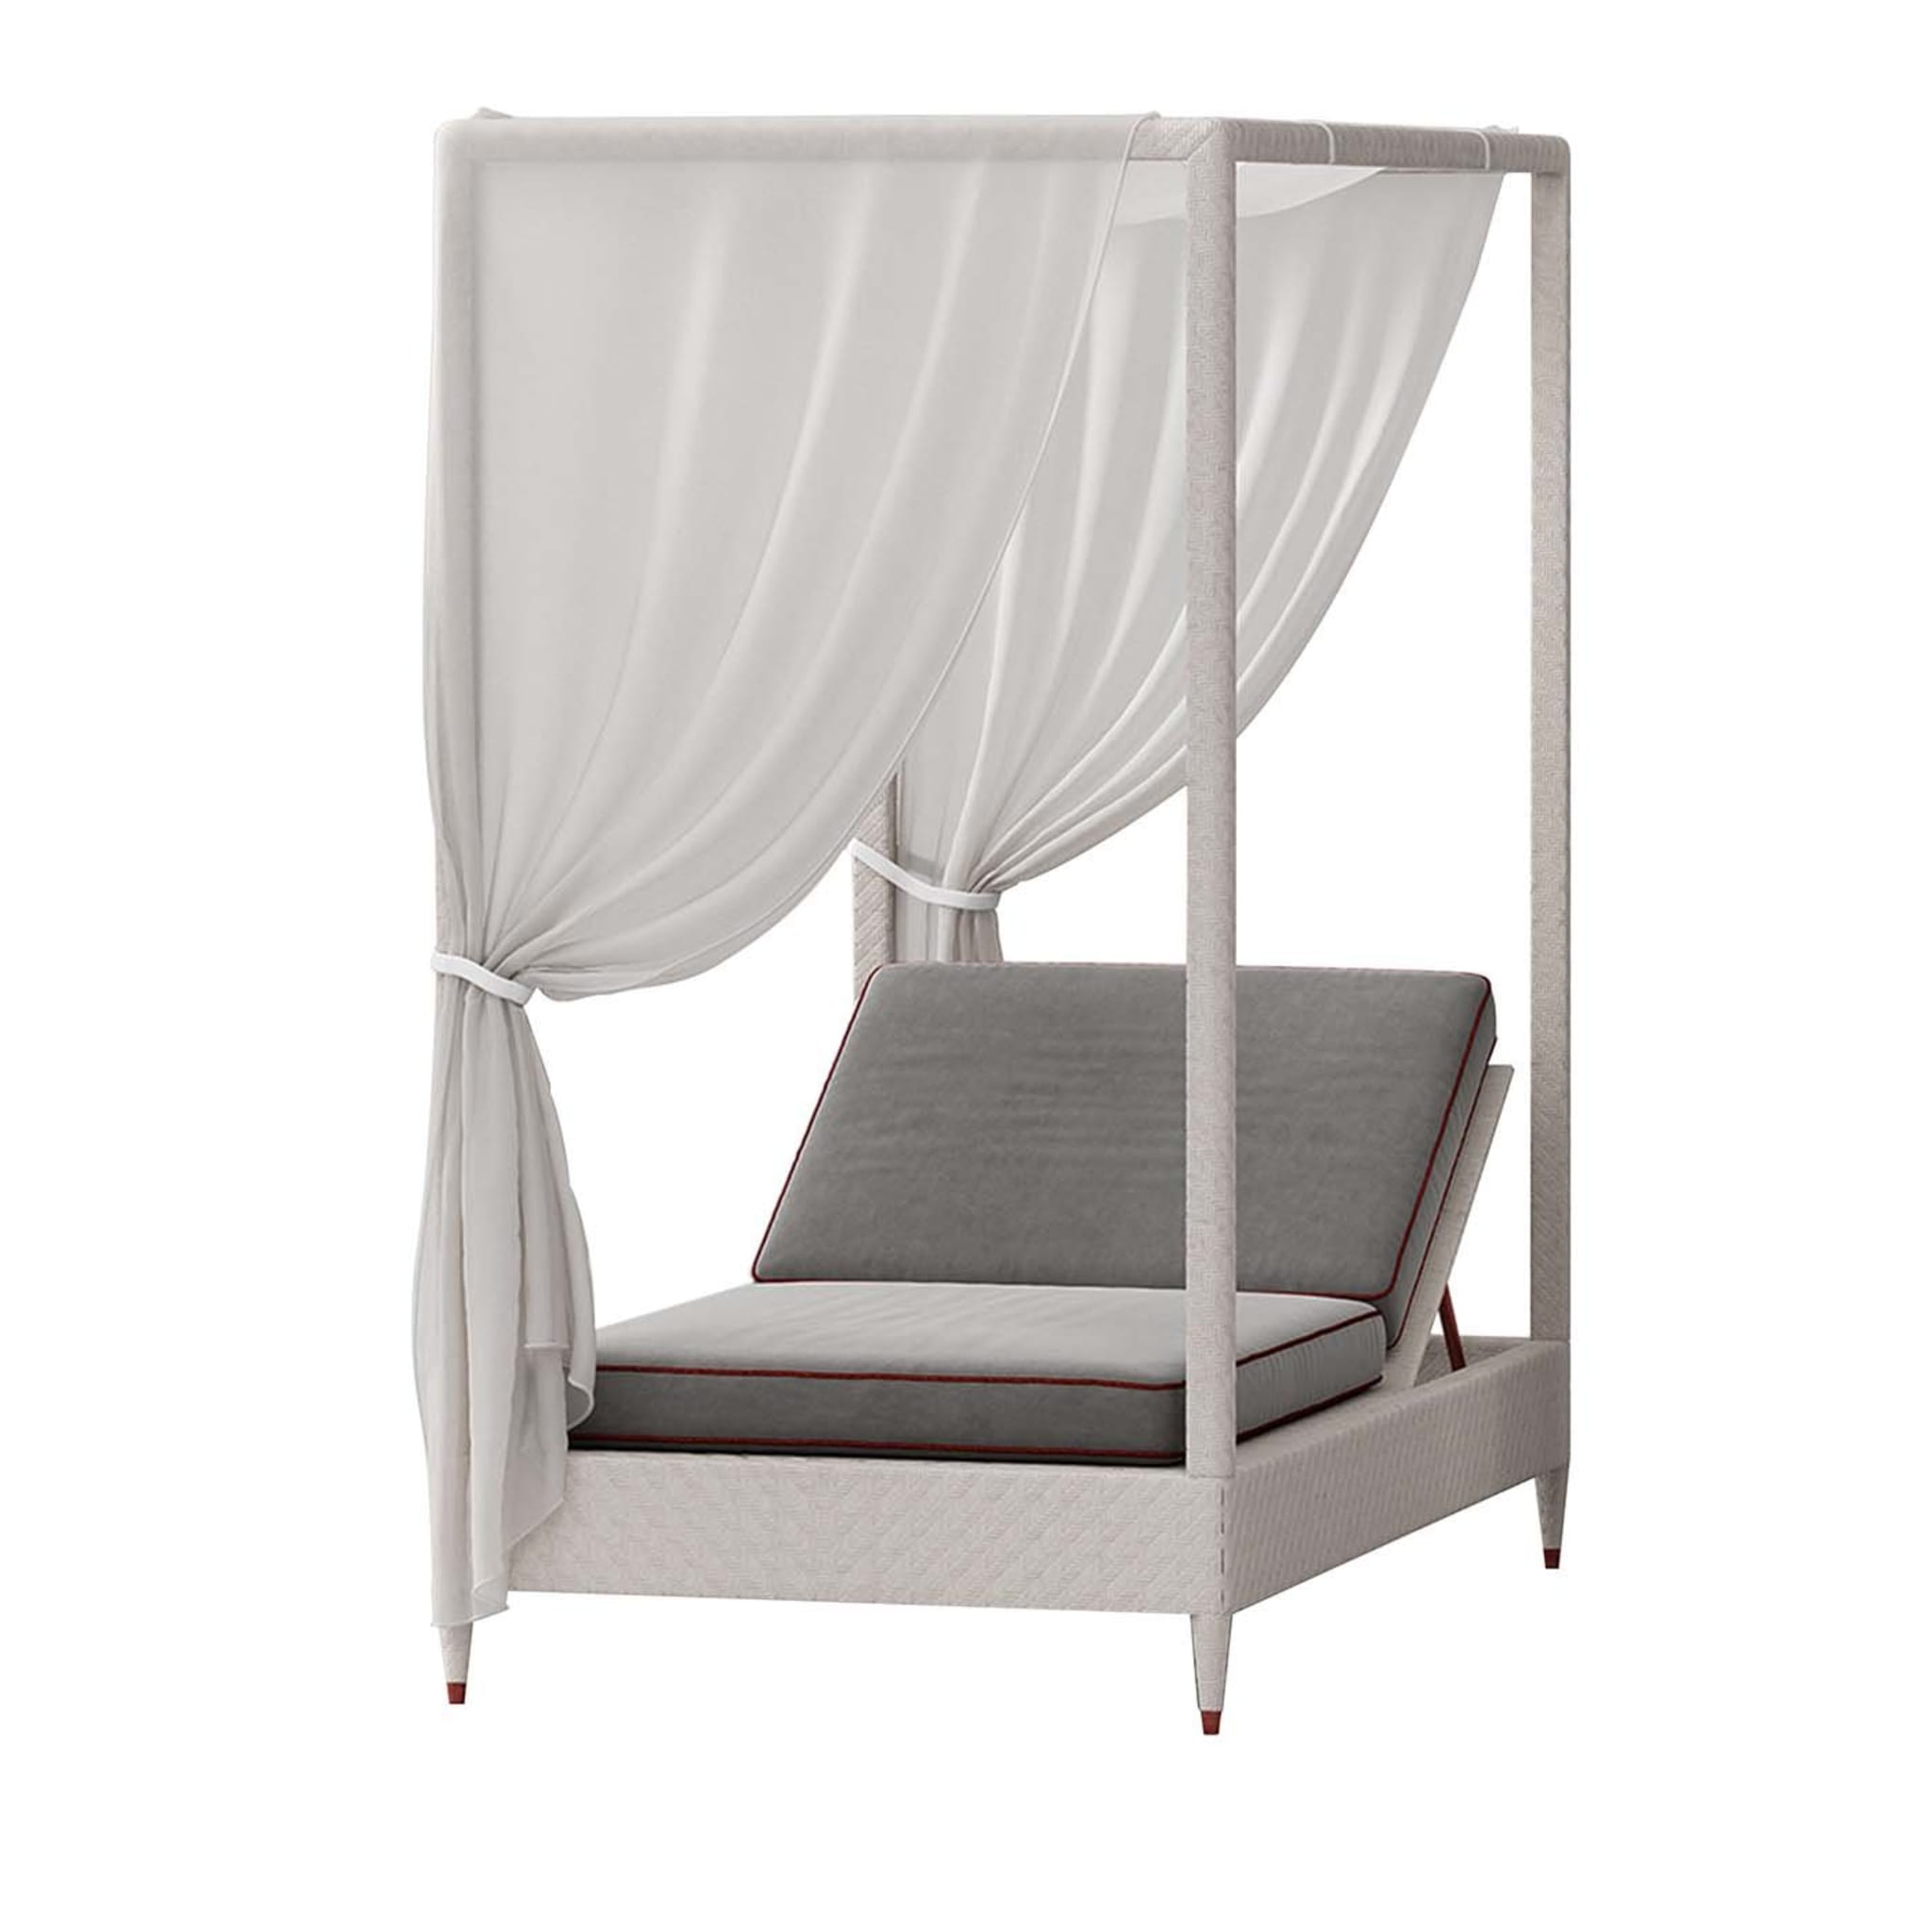 White 1-Seater Daybed with Canopy - Main view